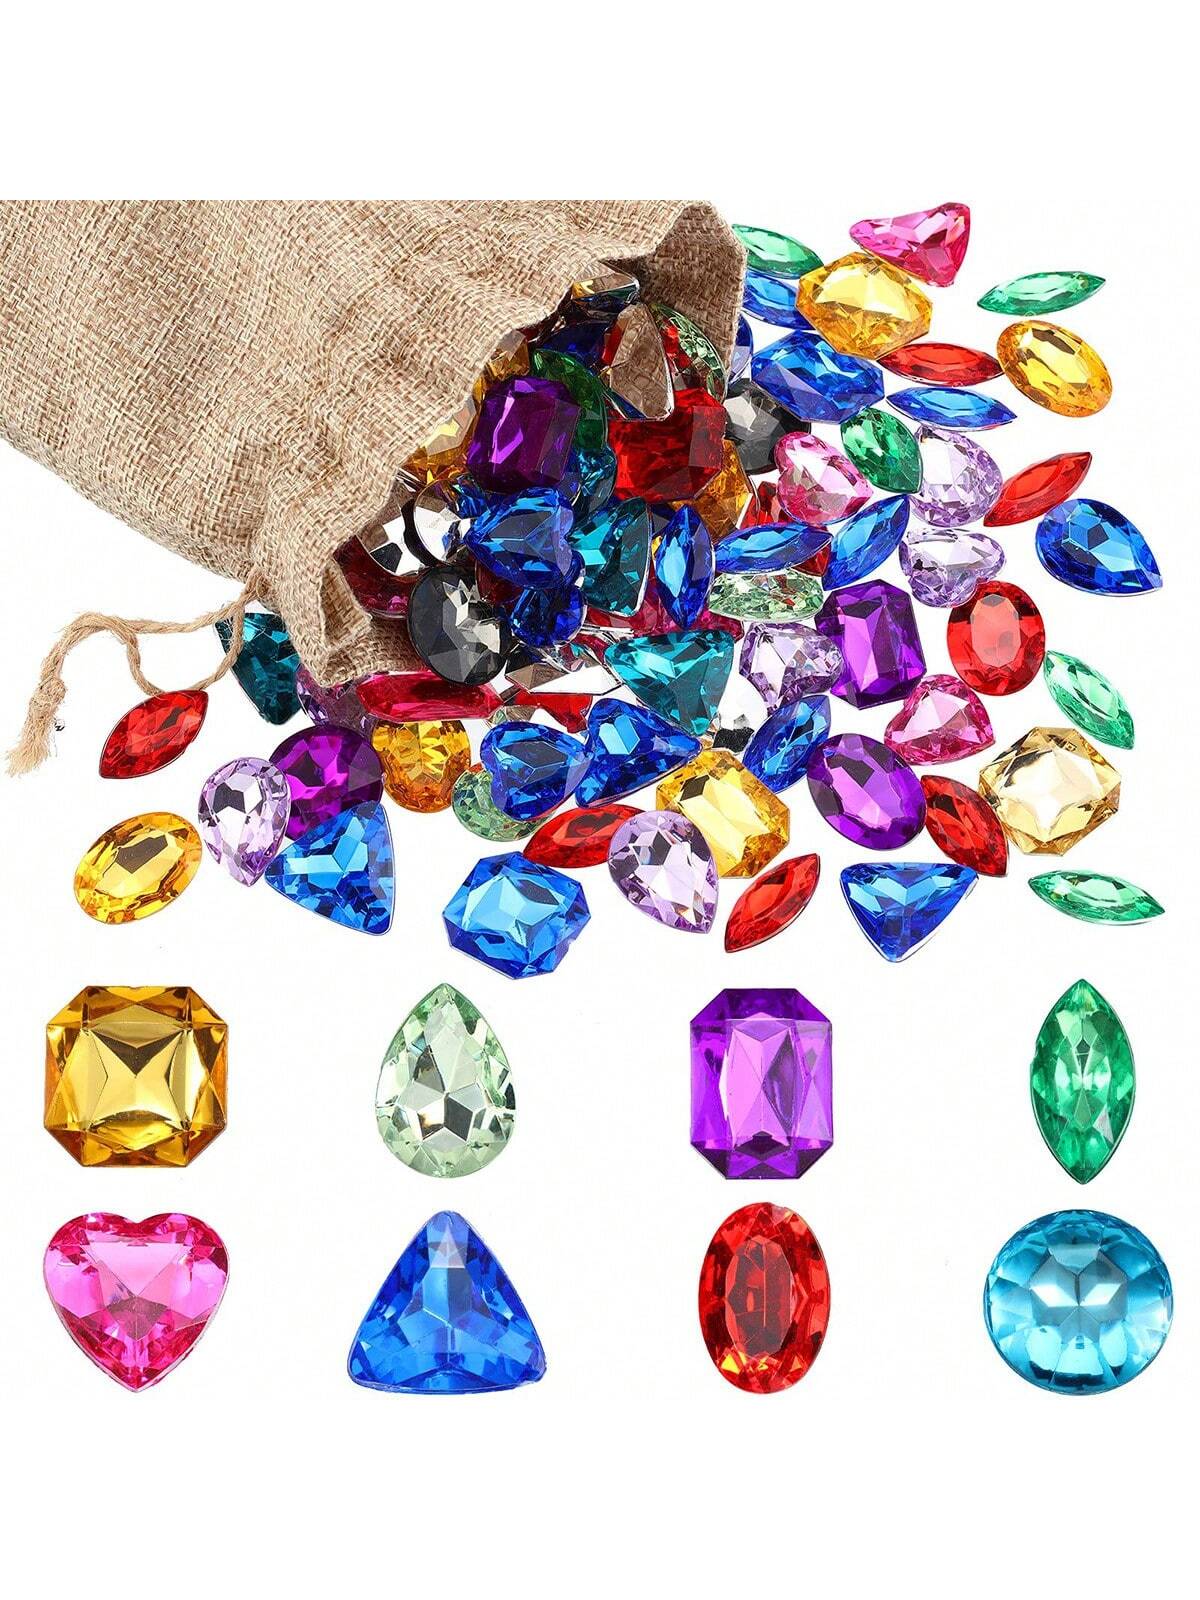 Acrylic Sparkling Gemstones 100 PC Set DIY Crafts or a Childs Toy in Finding a Treasure! 💜